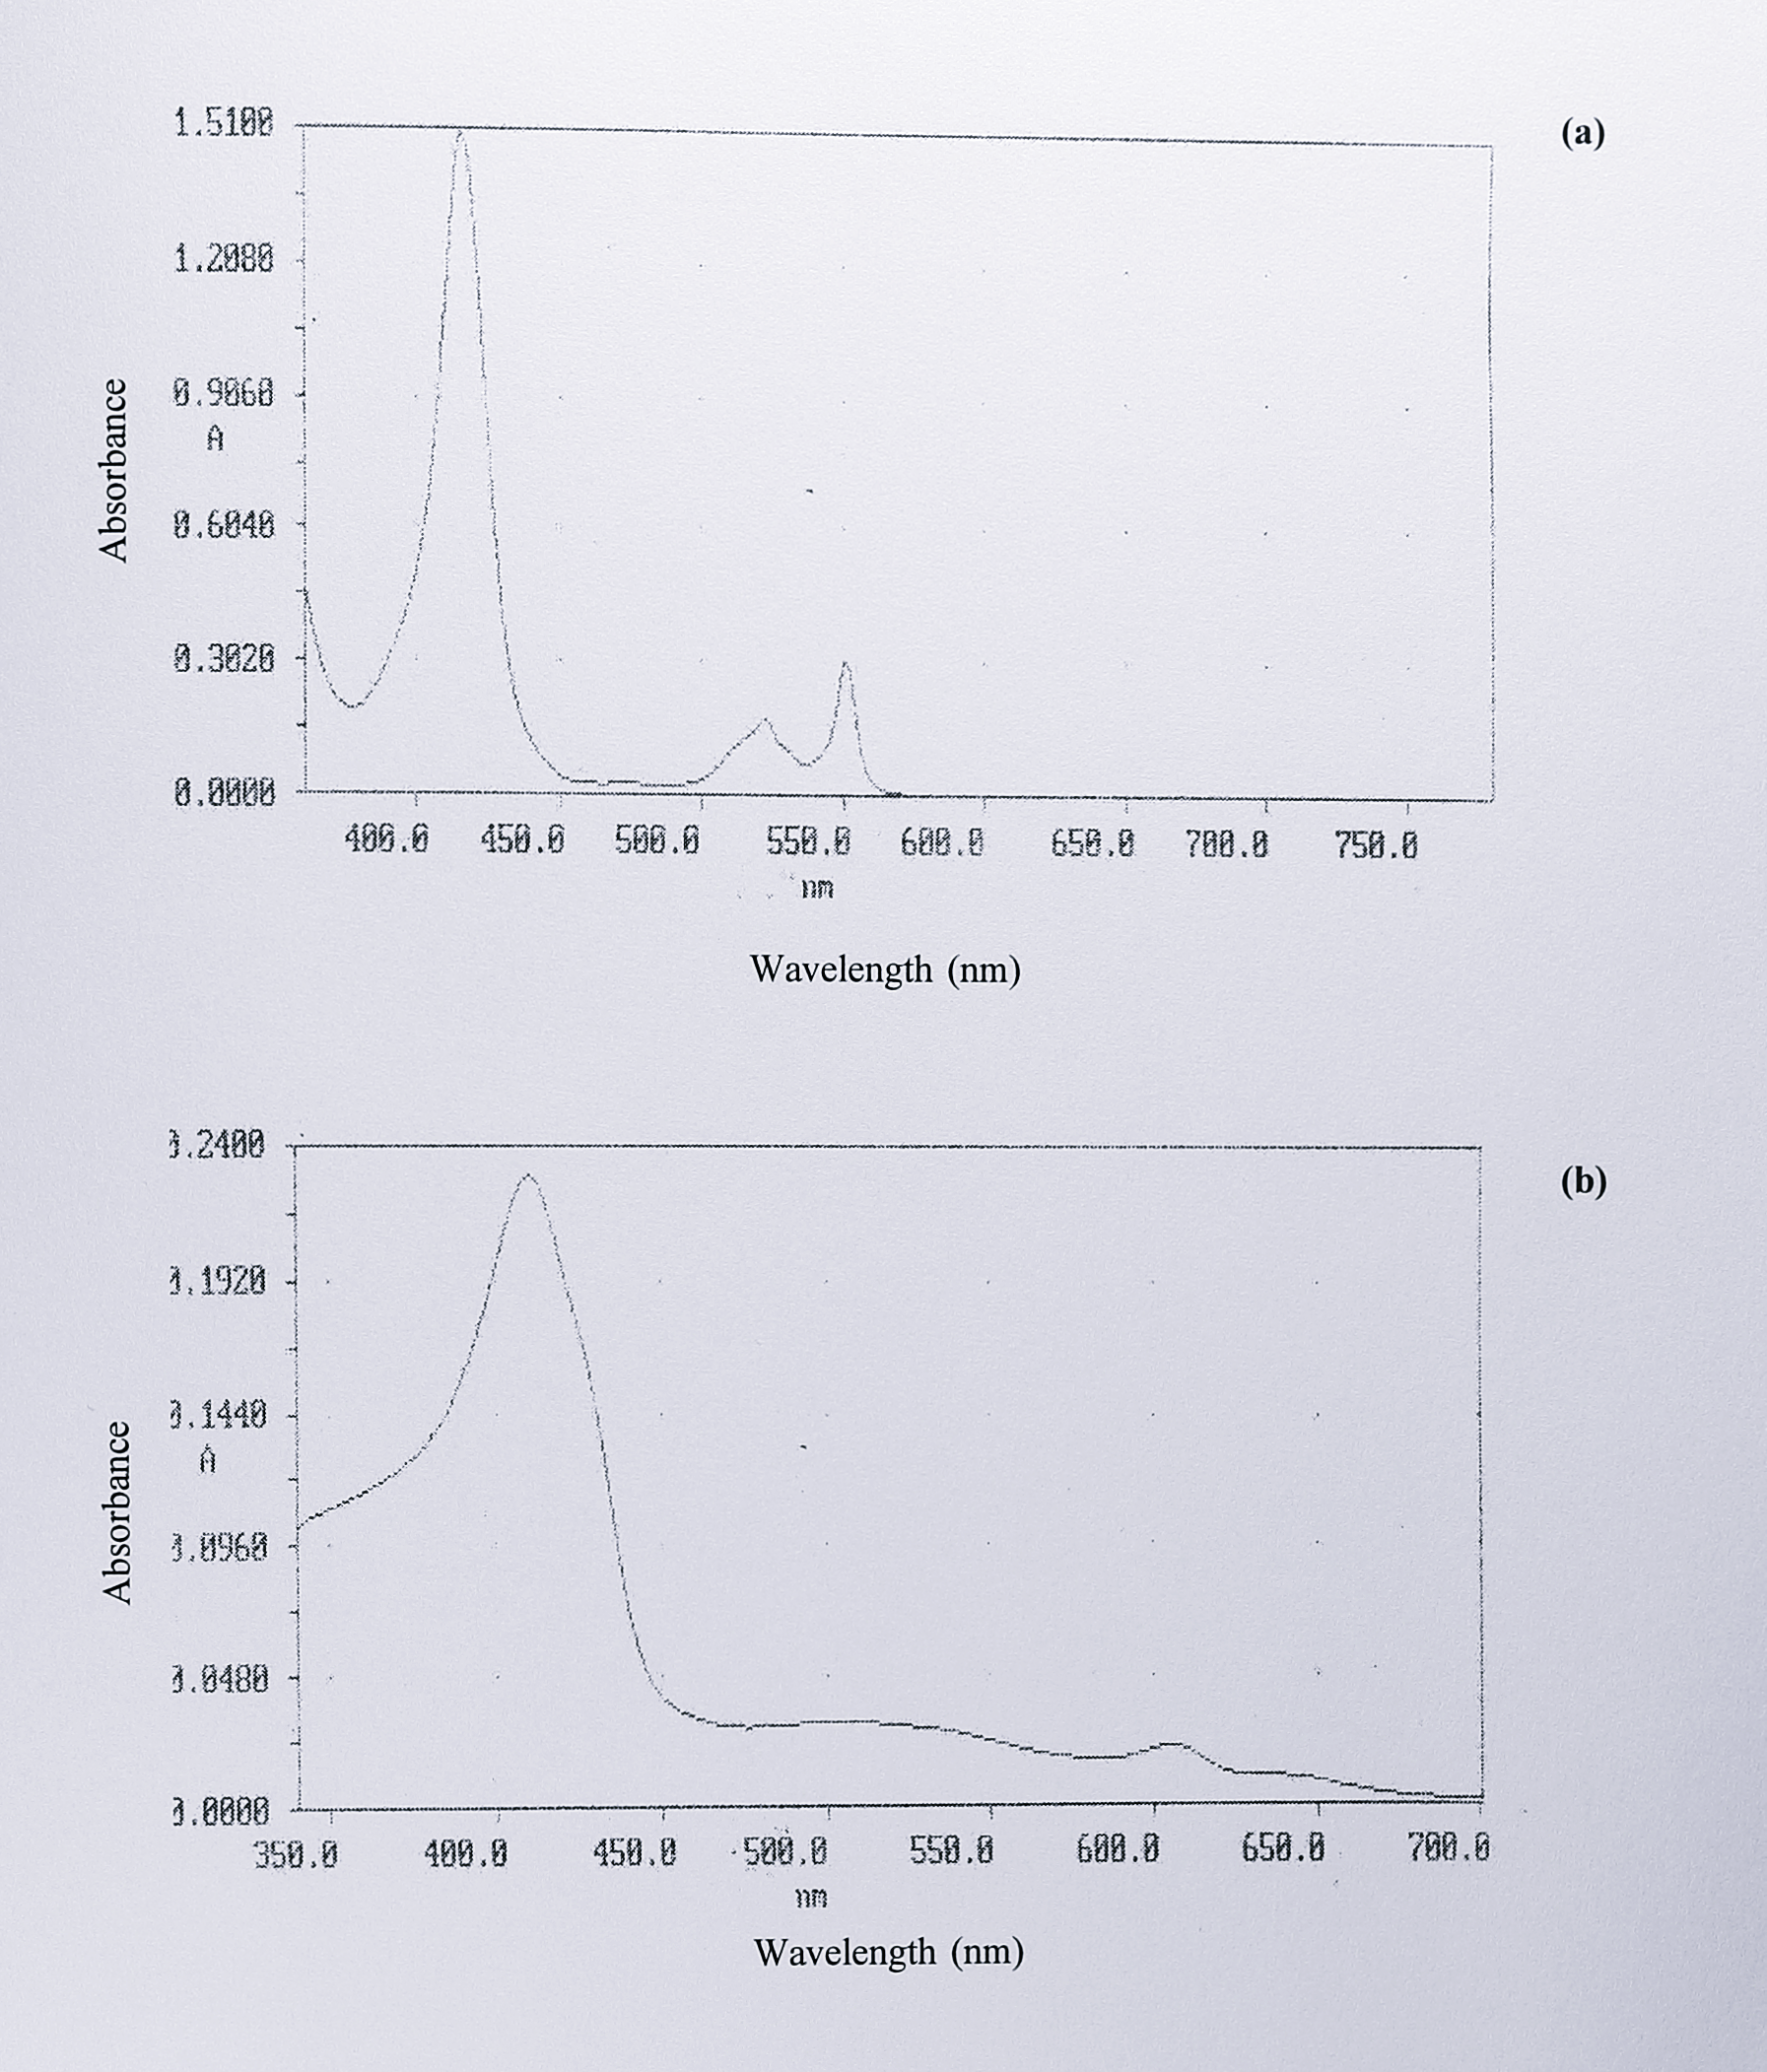 Visible spectra of (a) cytochrome _c_$_{550}$ and (b) cytochrome _c_' from _T. pantotropha_ [pMMBY25F]. Peak 2 had absorbance maxima at 415, 522 and 550 nm when reduced. It was identified by spectroscopy, elution position and size on SDS-PAGE as cytochrome _c_$_{550}$. Peak 3 had absorbance maxima at 410, 500 and 604 nm when reduced and showed a shoulder to the red side of the peak at 410 nm. It was identified as being cytochrome _c_' using the methods employed to identify cytochrome _c_$_{550}$.